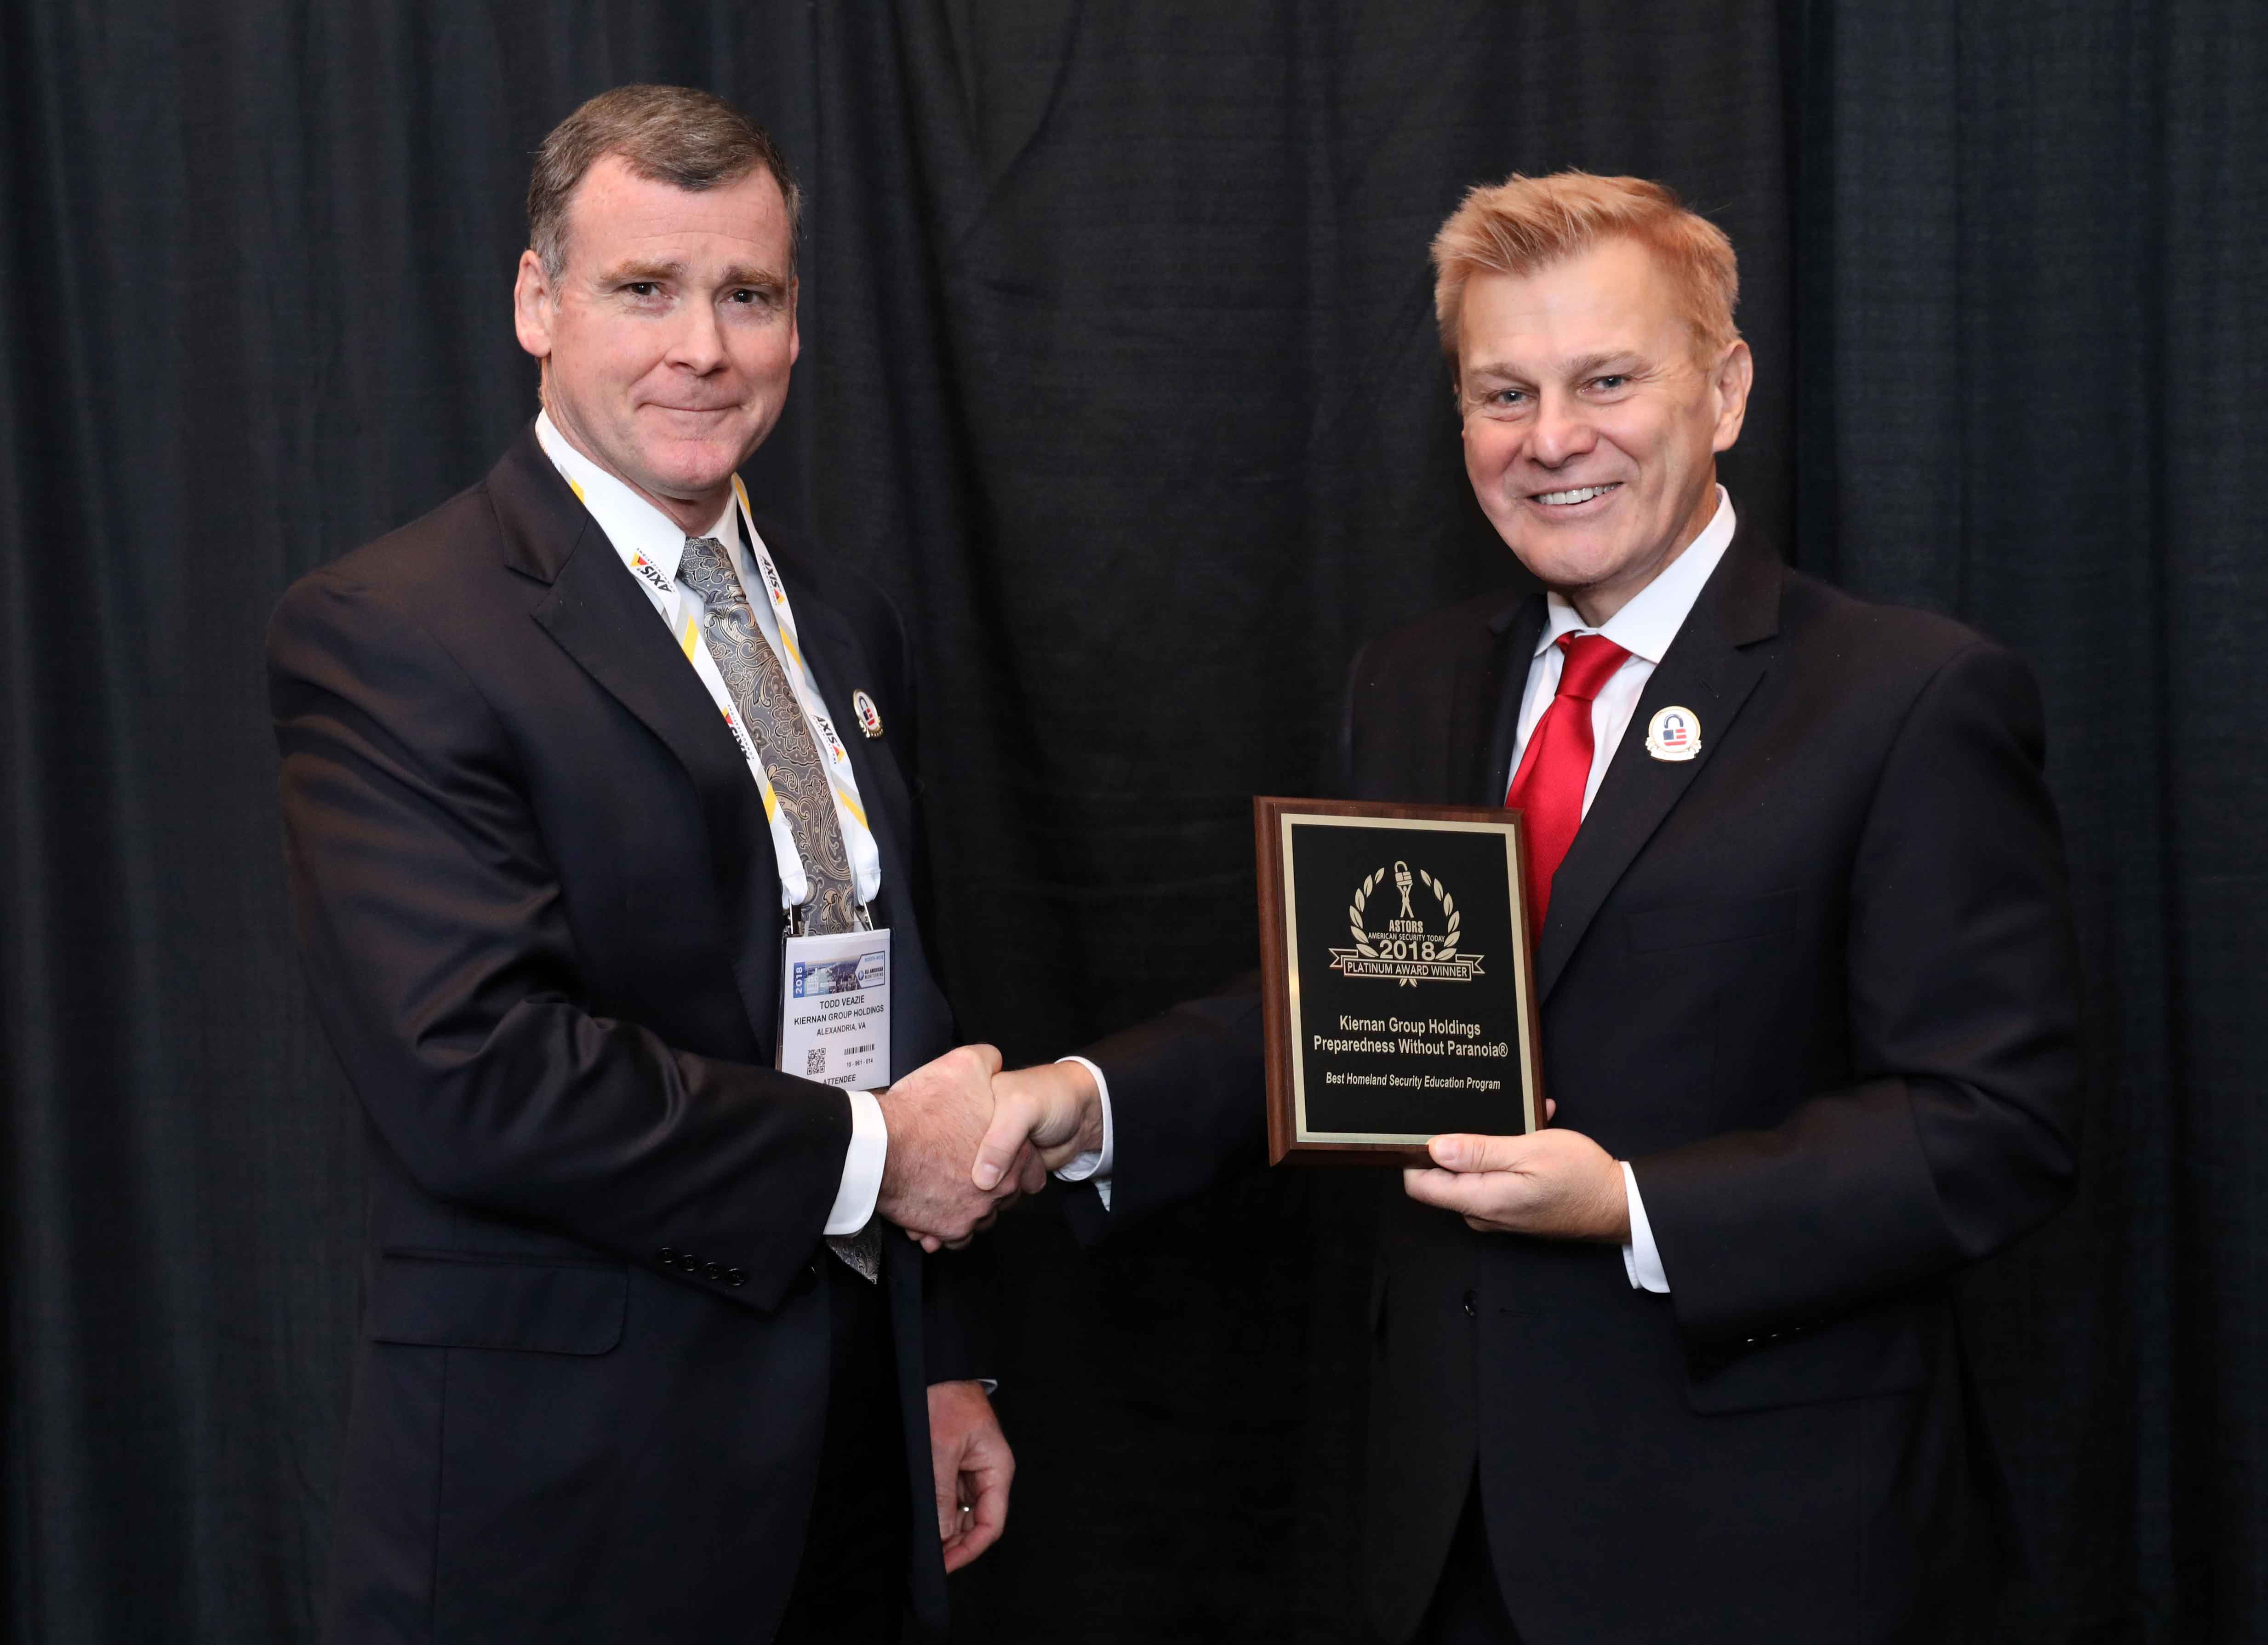 Todd Veazie, Chief Operating Officer, Kiernan Group Holdings accepting a 2018 ‘ASTORS’ Award at ISC East